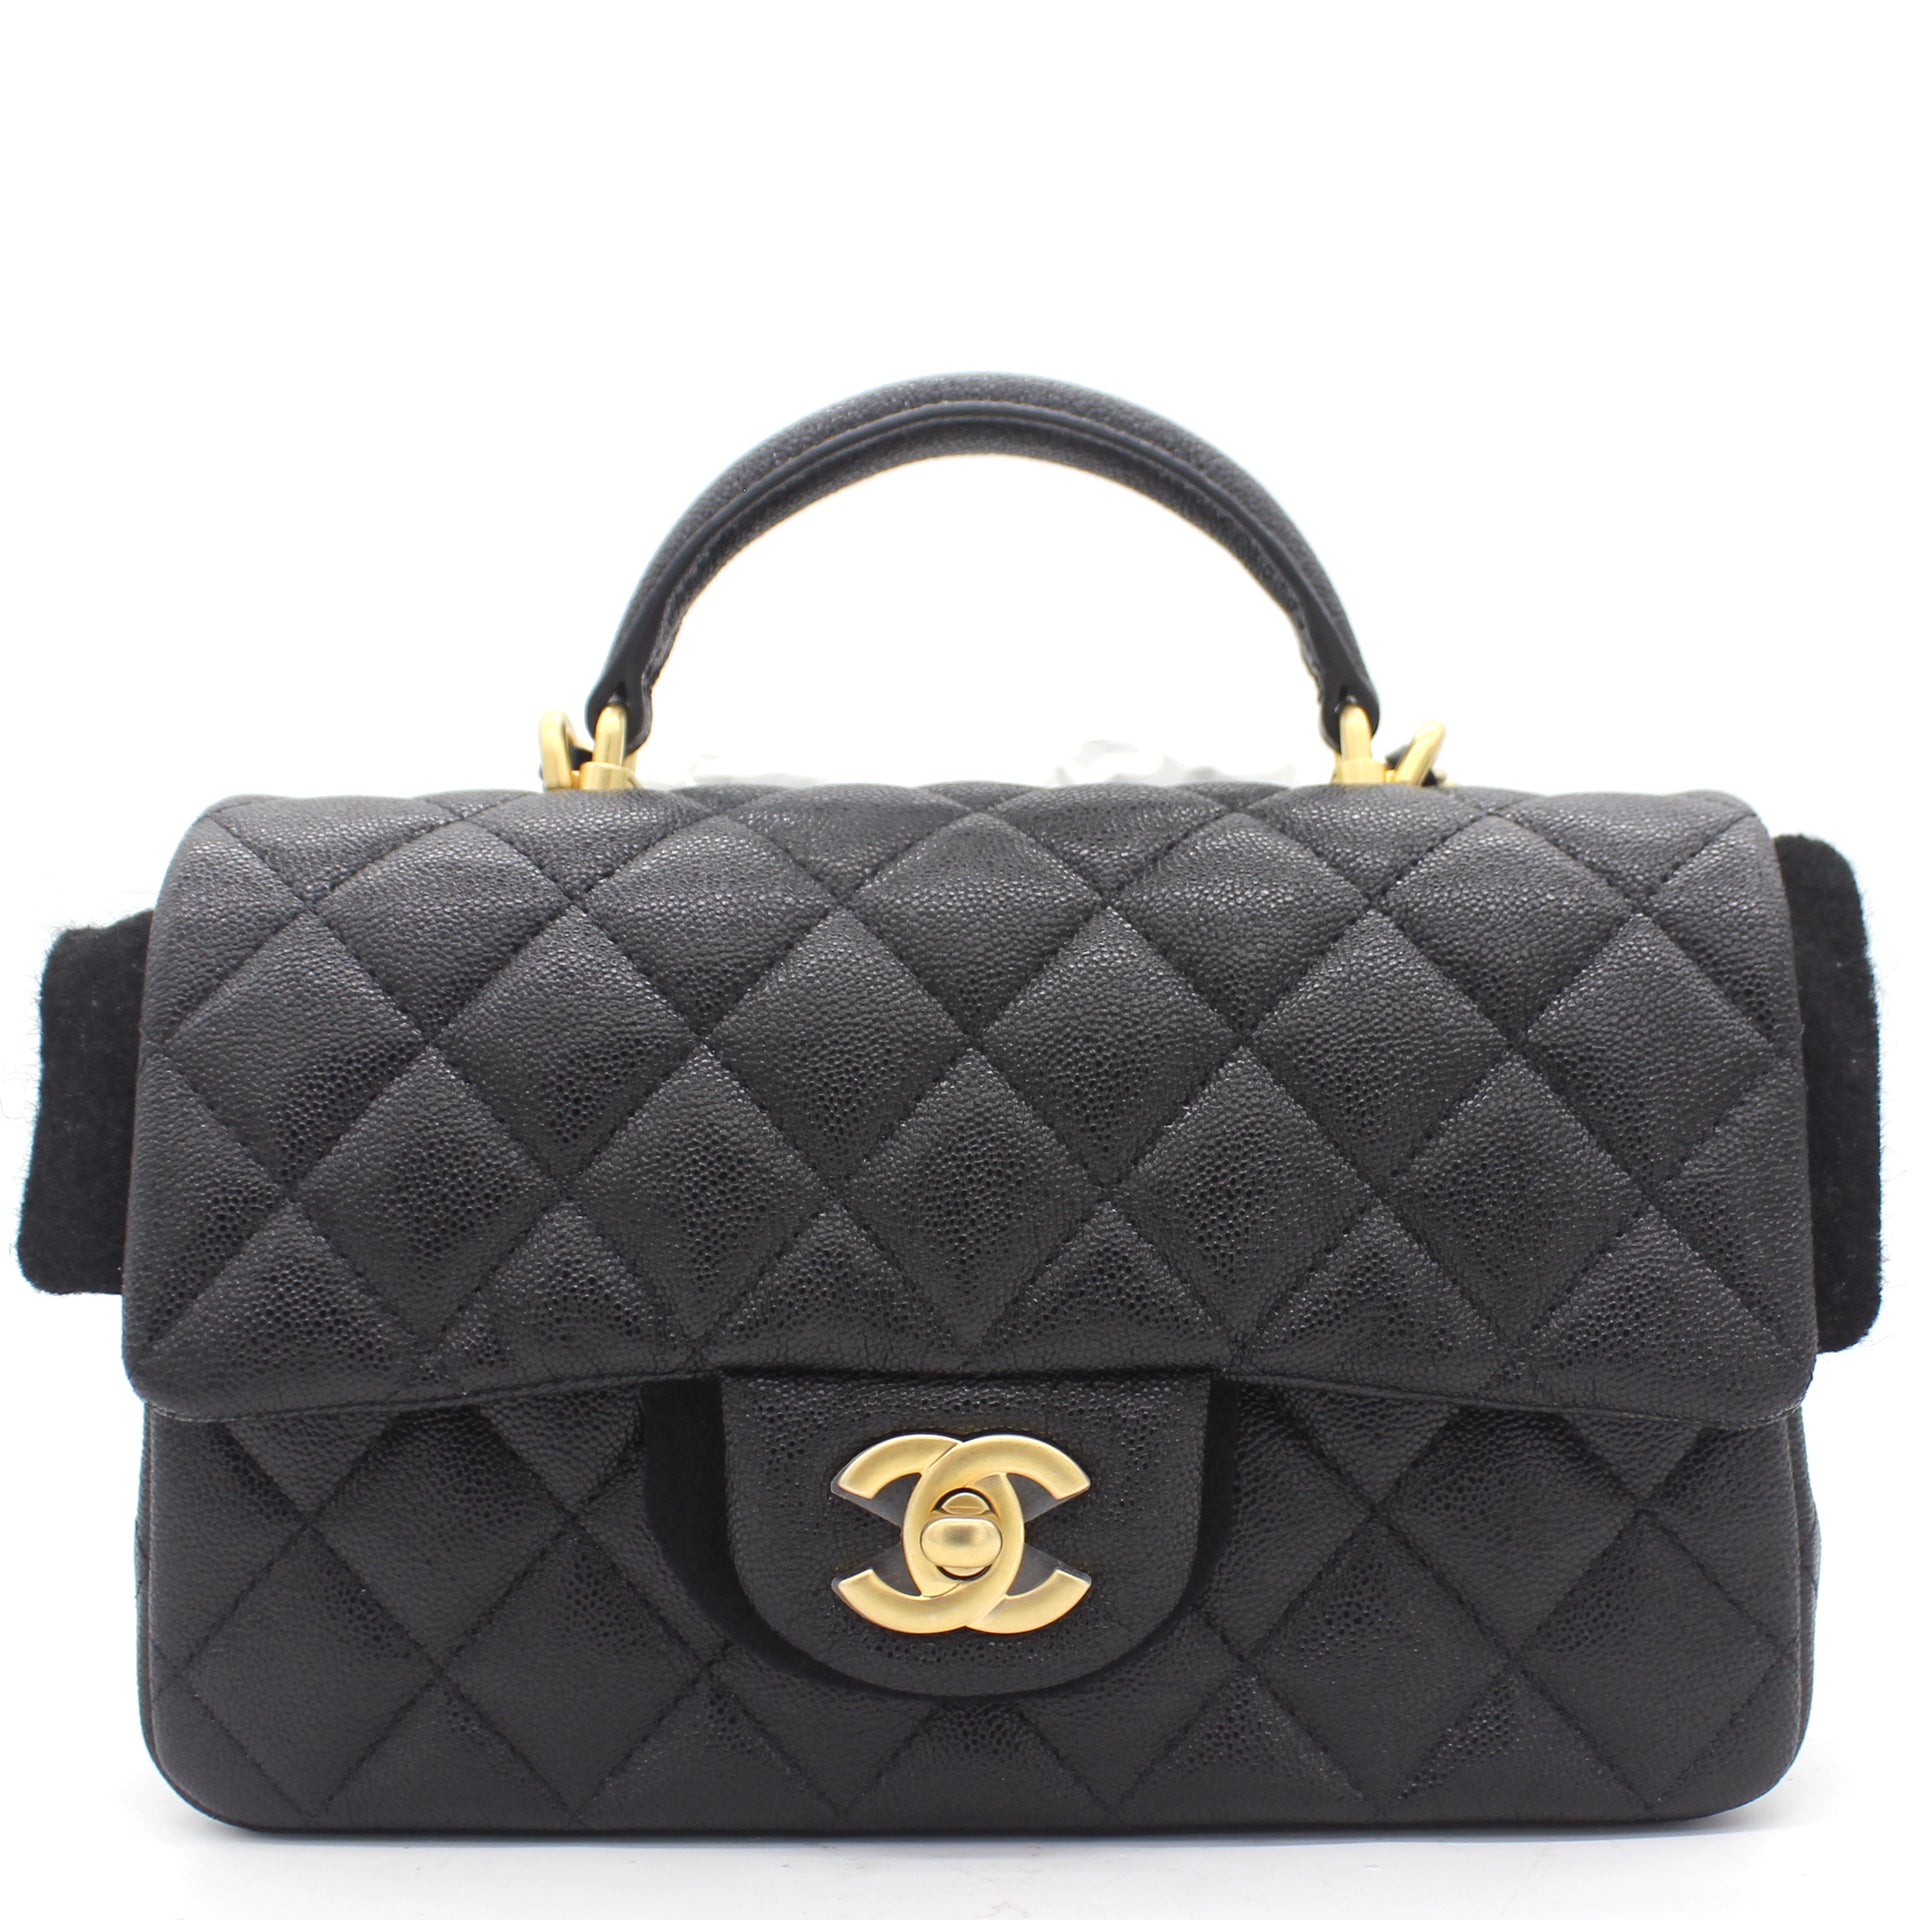 flap bag with top handle chanel price